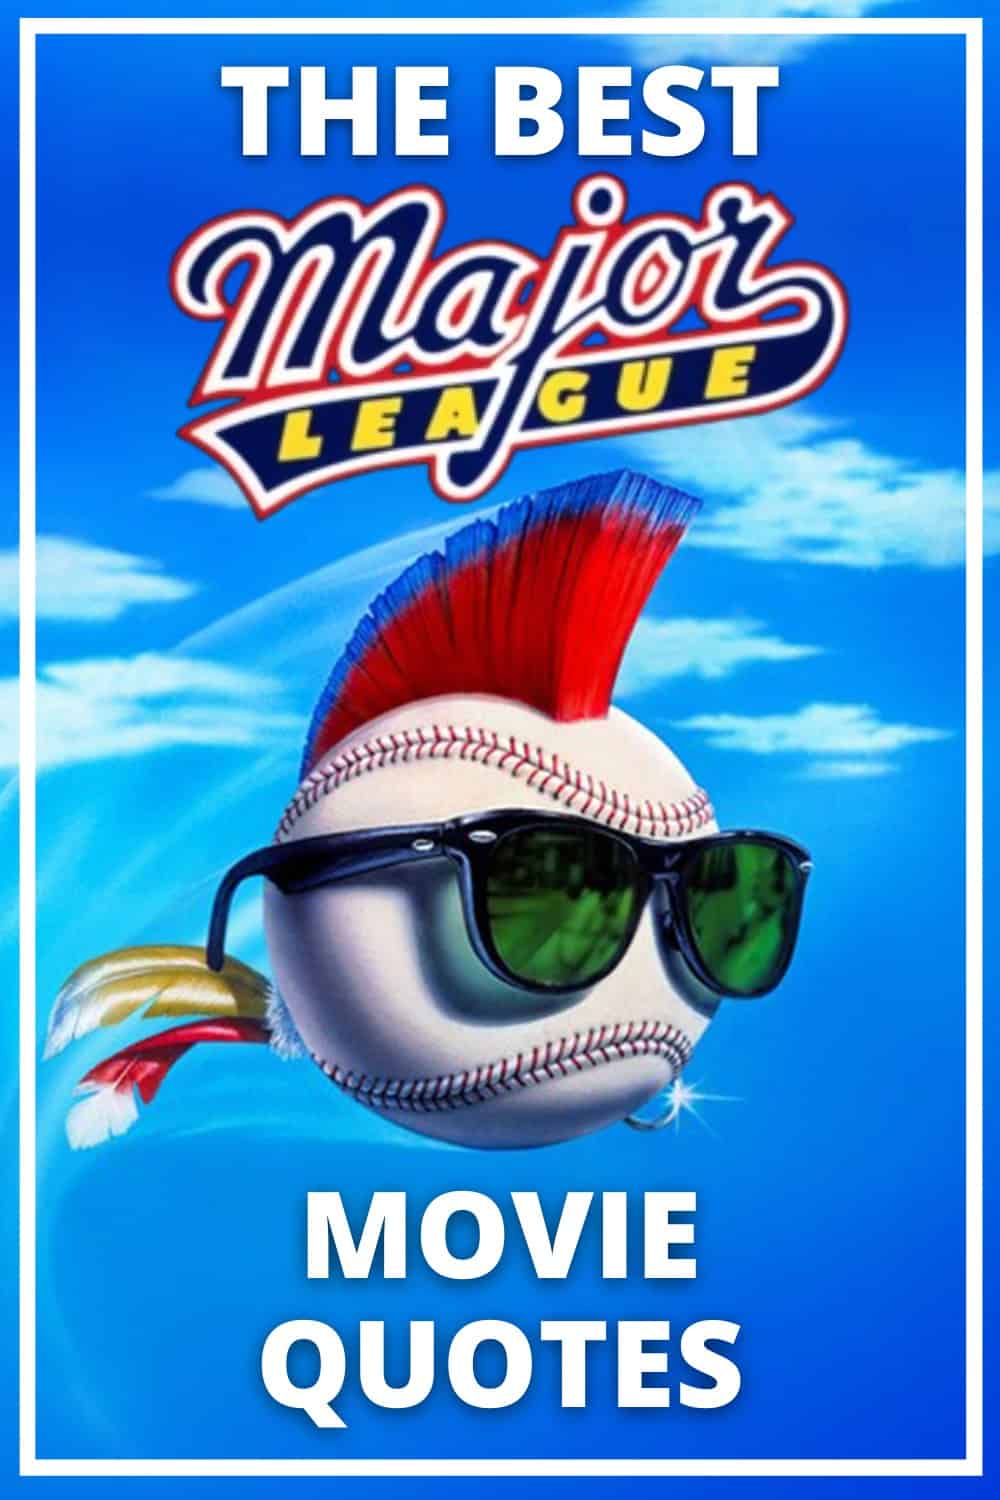 Best Quotes From The Major League Movie